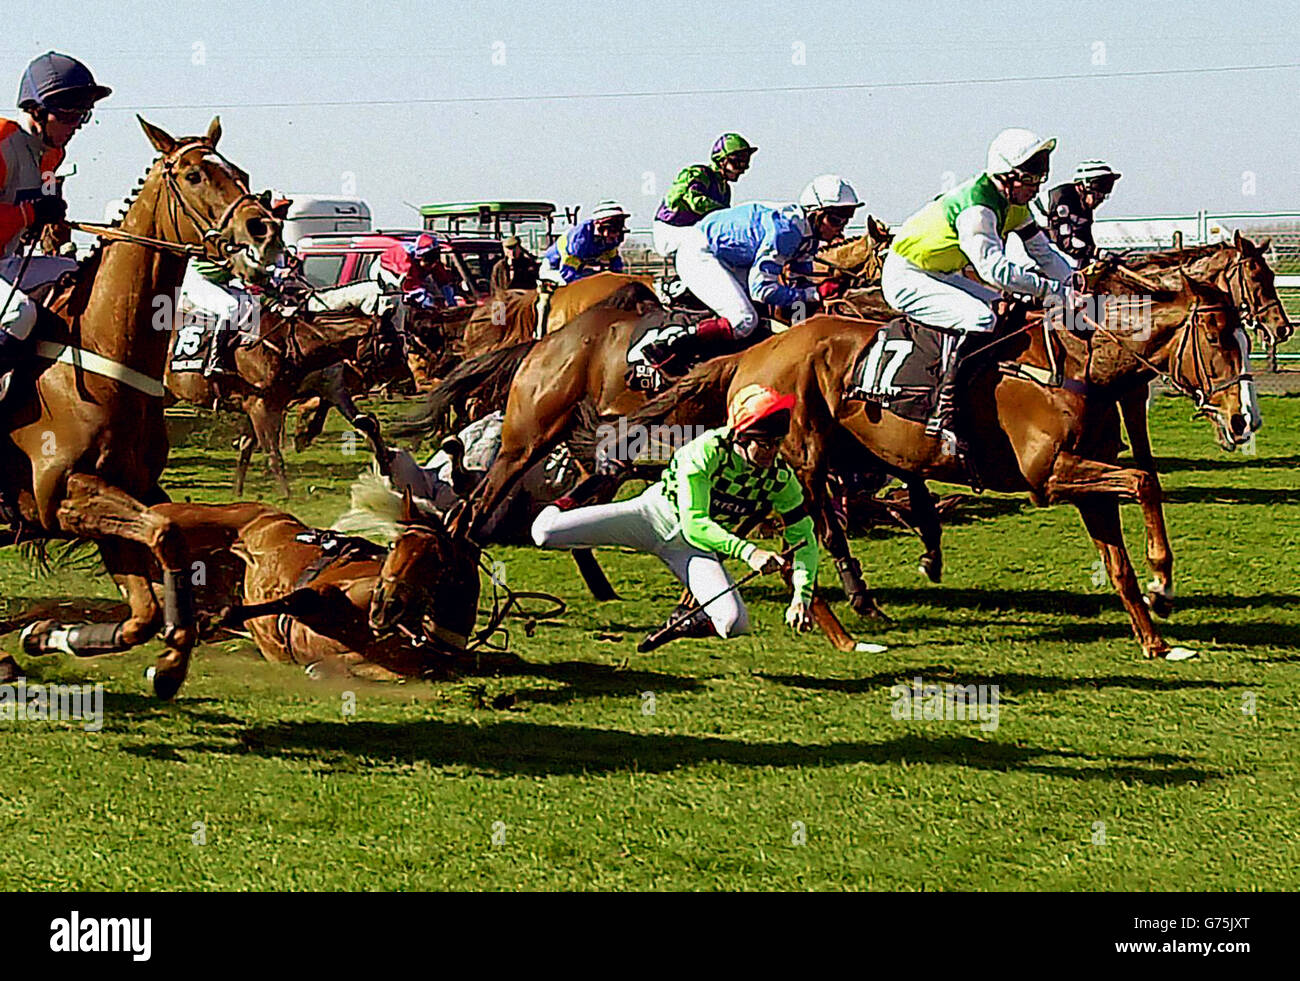 Connor O'Dwyer falls of Wicked Crack at the first fence during the Martell Grand National at Aintree. Stock Photo